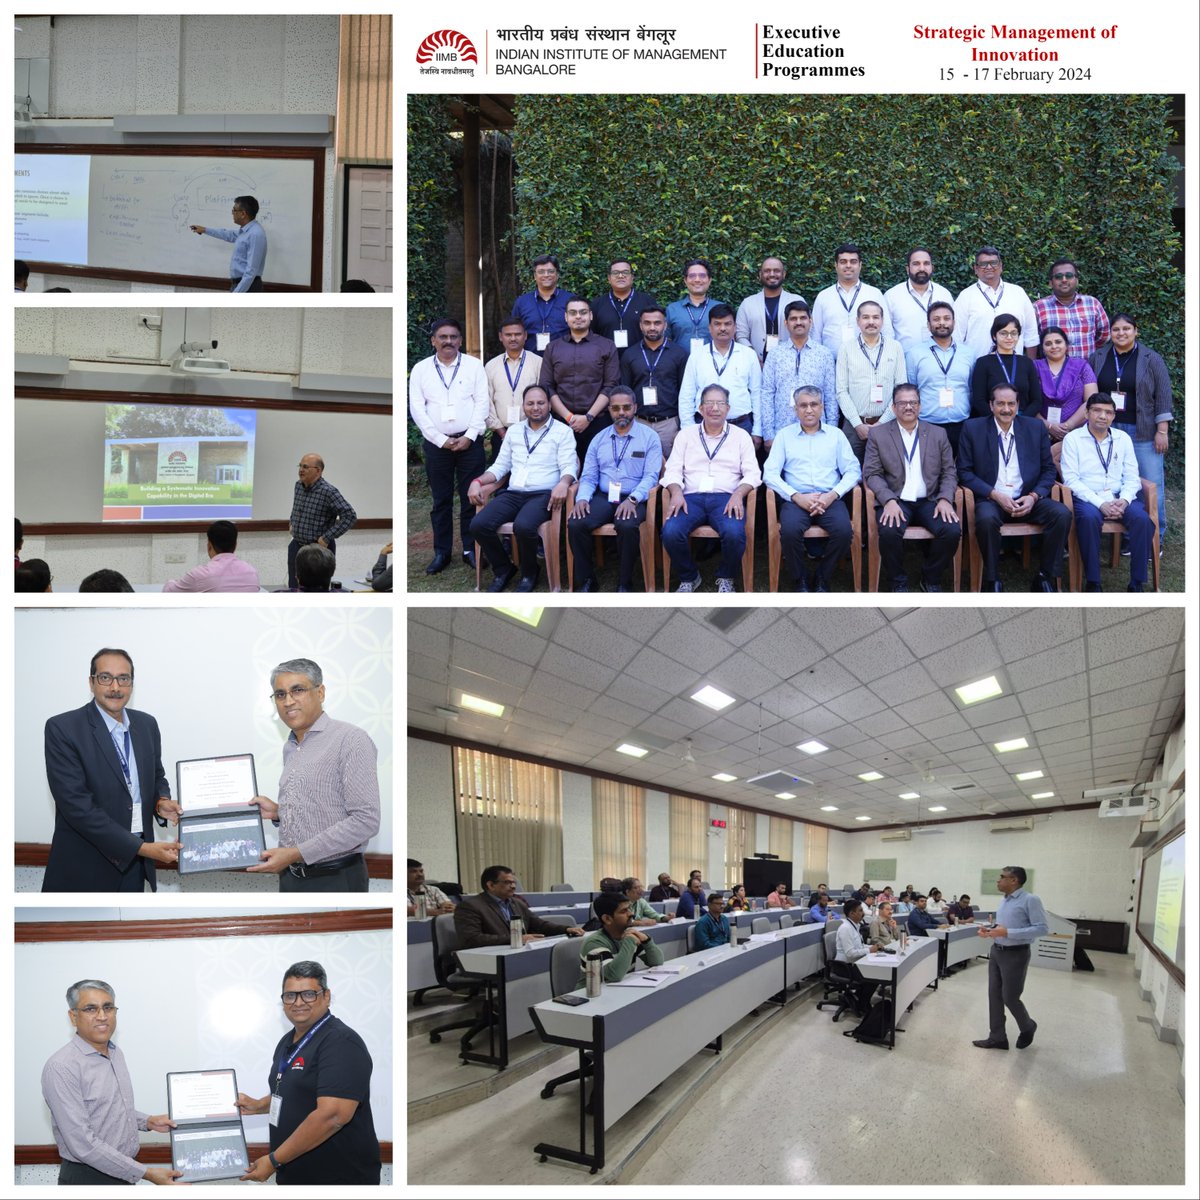 IIMB #ExecutiveEducation is happy to announce that a team of dynamic leaders & managers from #innovation and R&D wing of their organisations recently completed a 3-day programme on 'Strategic Management of Innovation'. #iimbangalore #InnovationManagement #ResearchStrategy